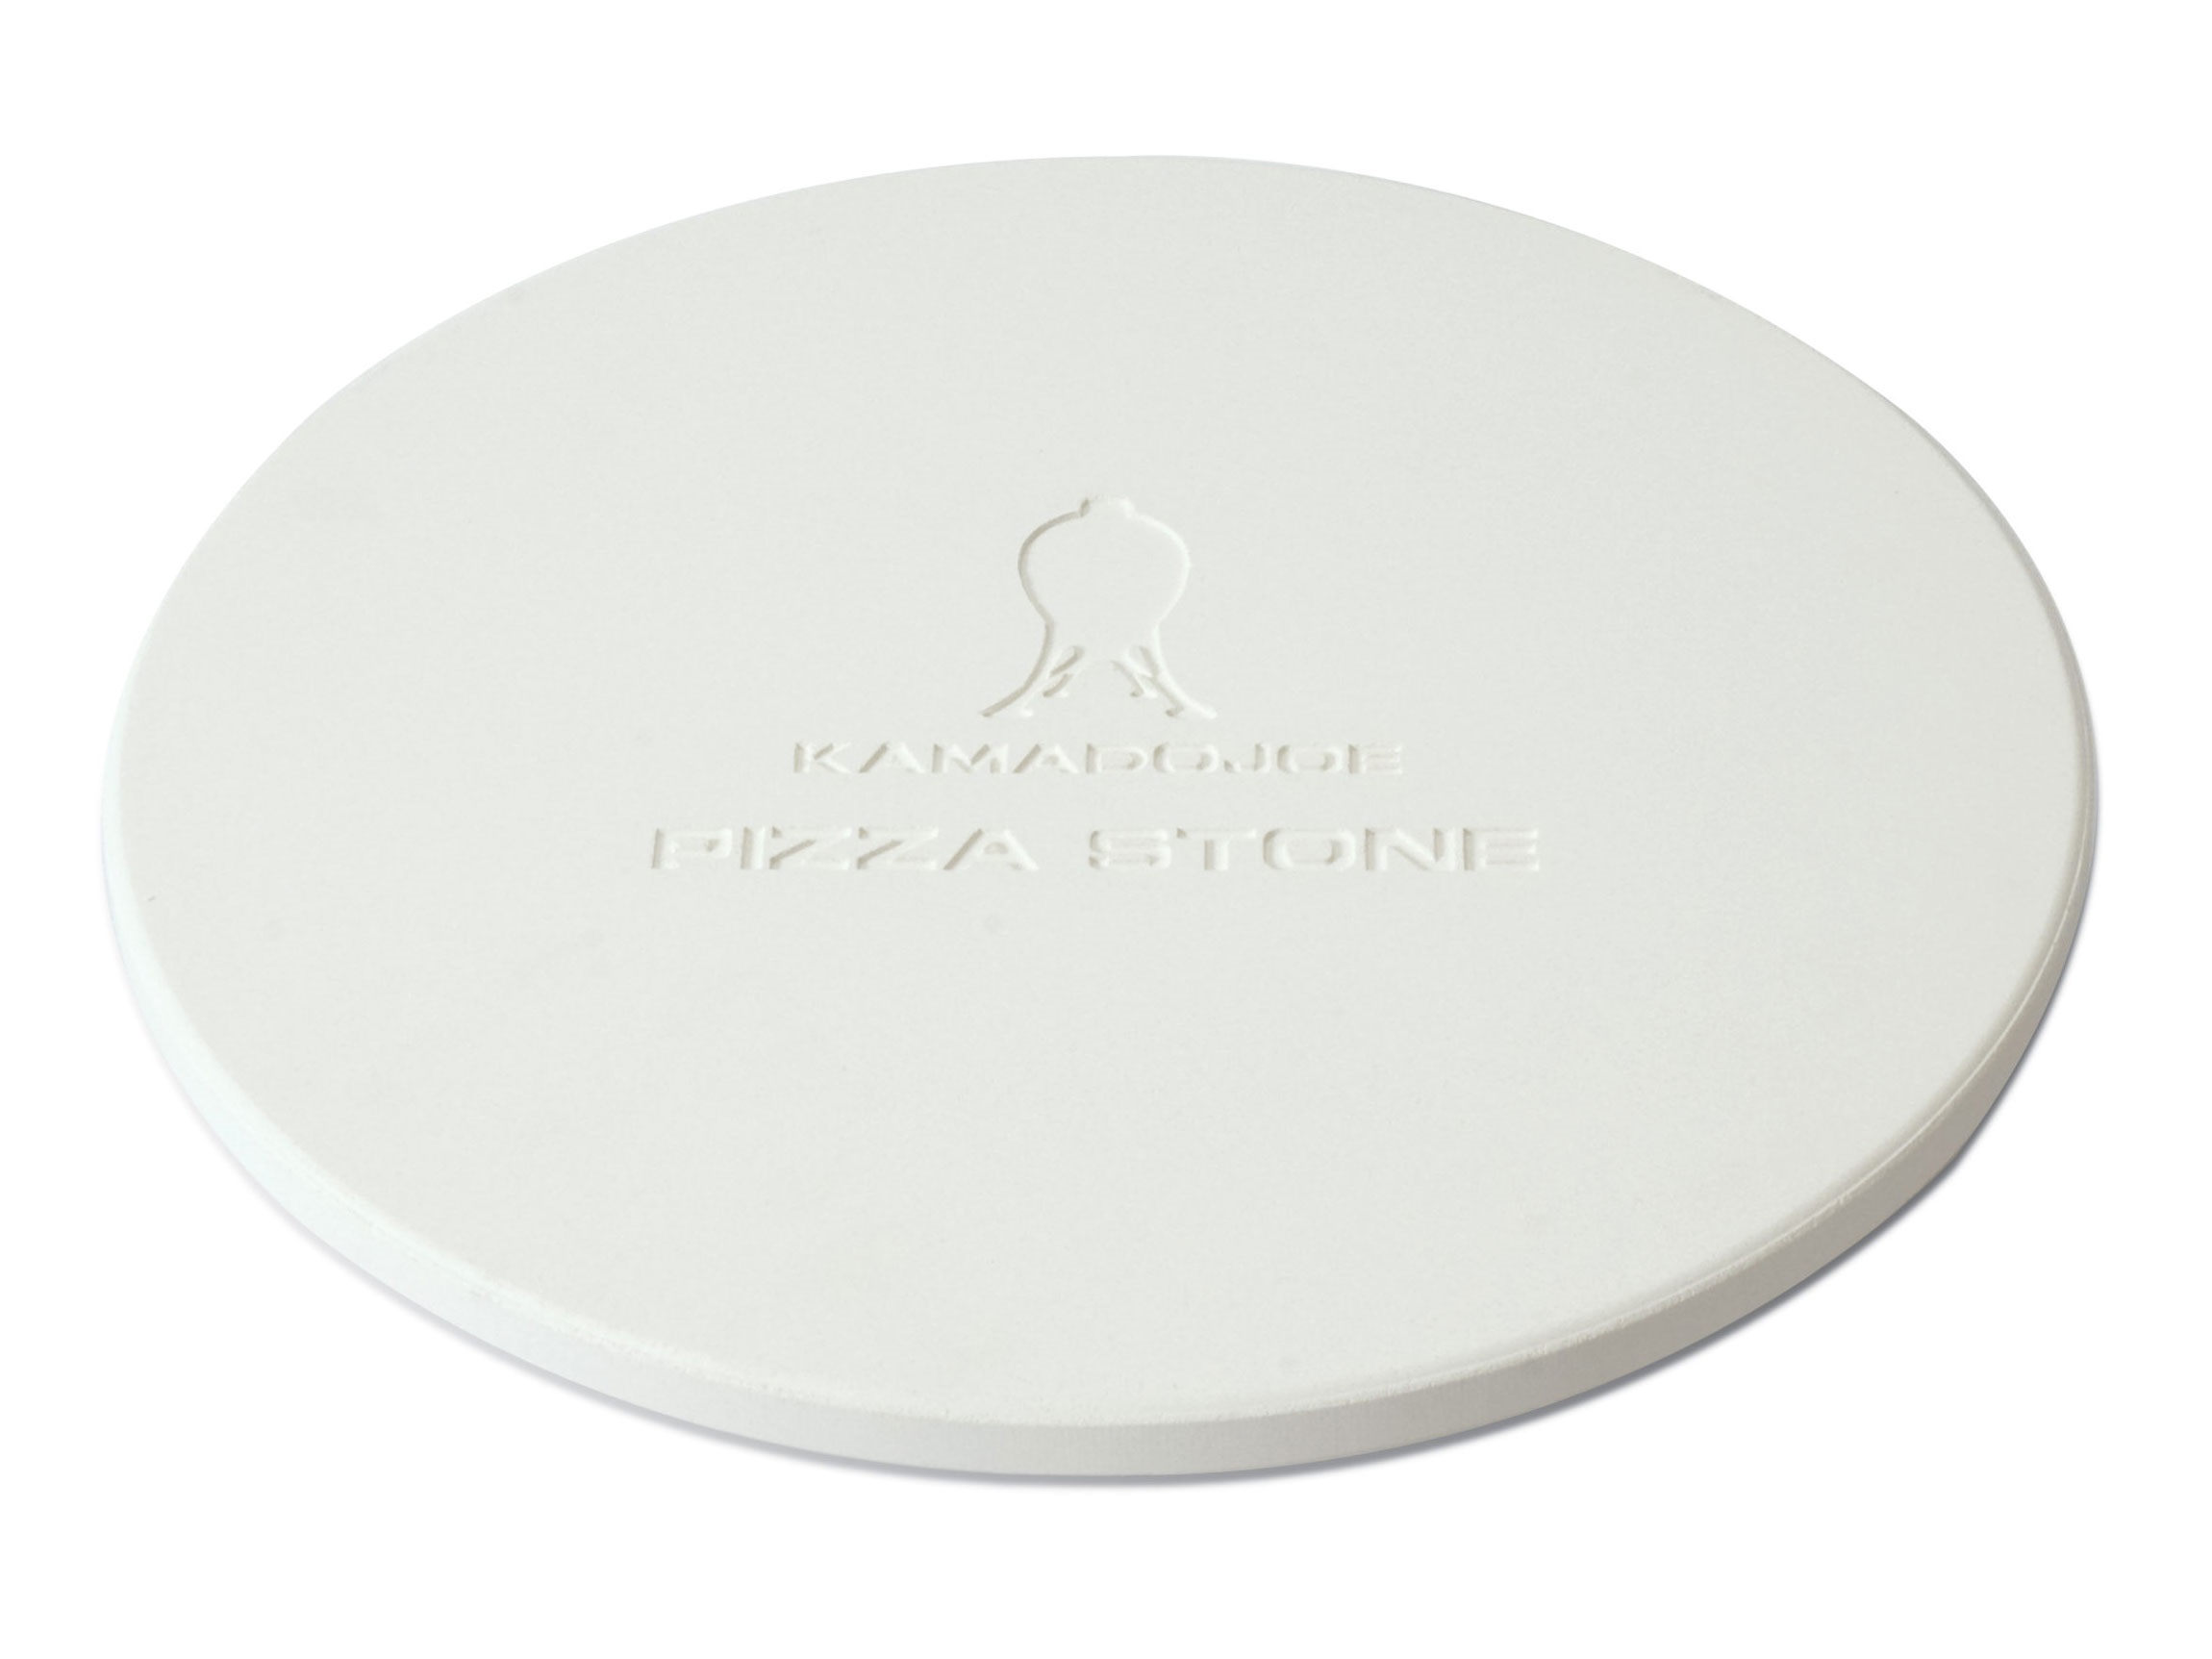 This high-impact ceramic pizza stone is ideal for your Kamado Joe or any BBQ or pizza oven